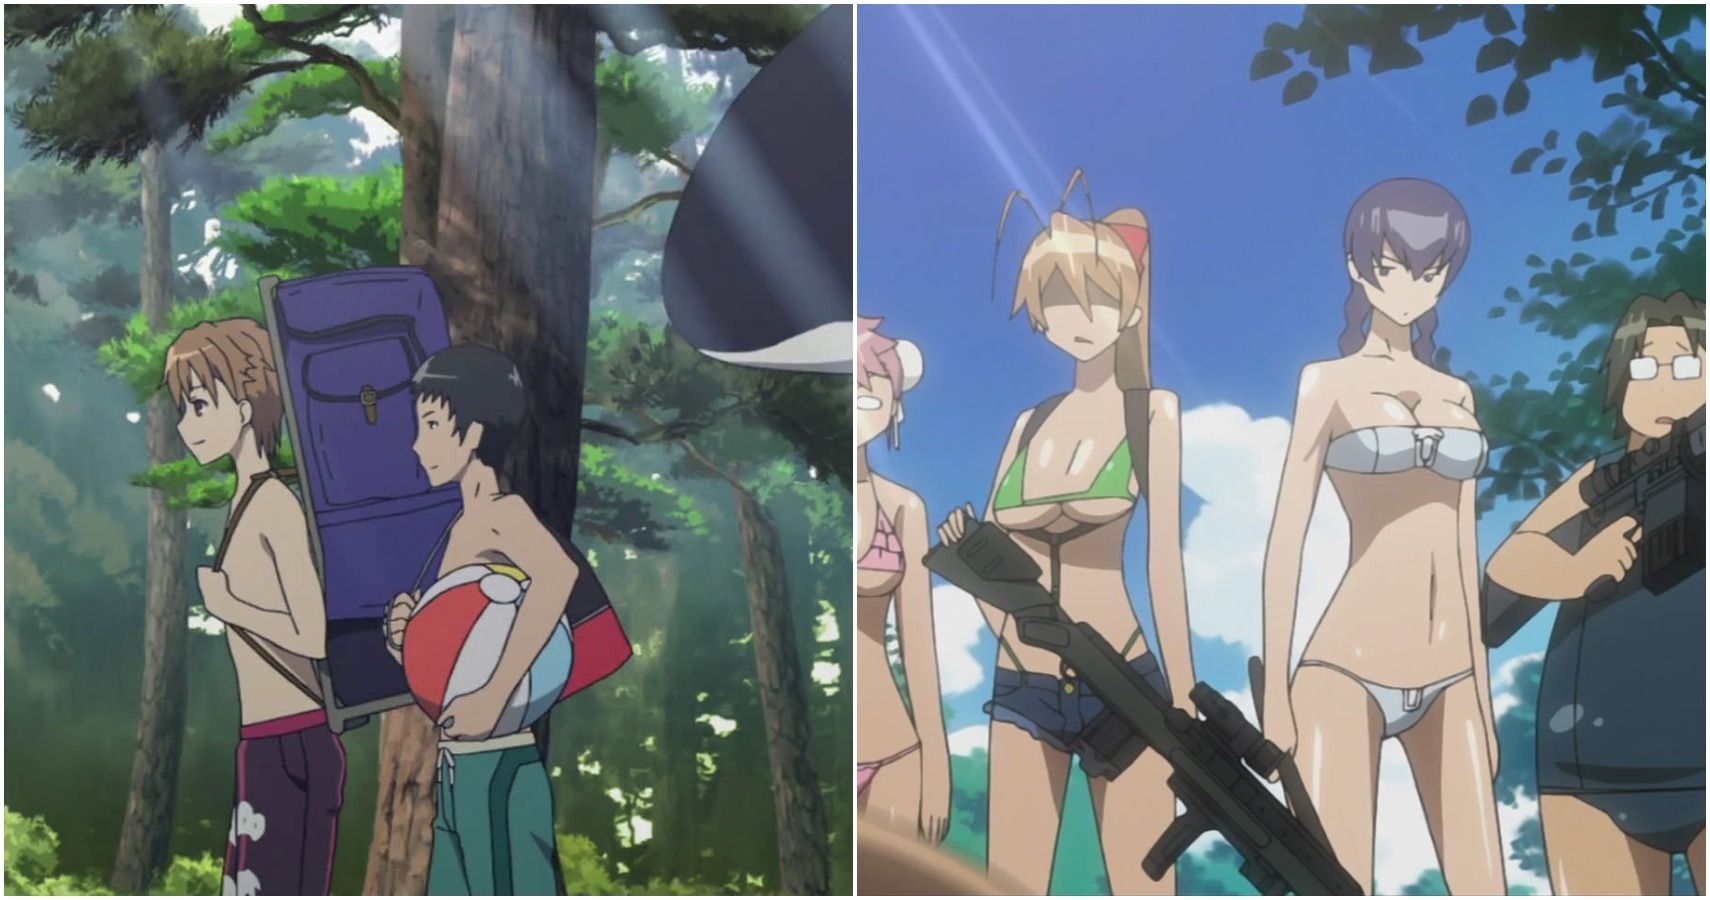 Sexy Anime School Porn - Spring Break: The 10 Best Beach Episodes In Anime History